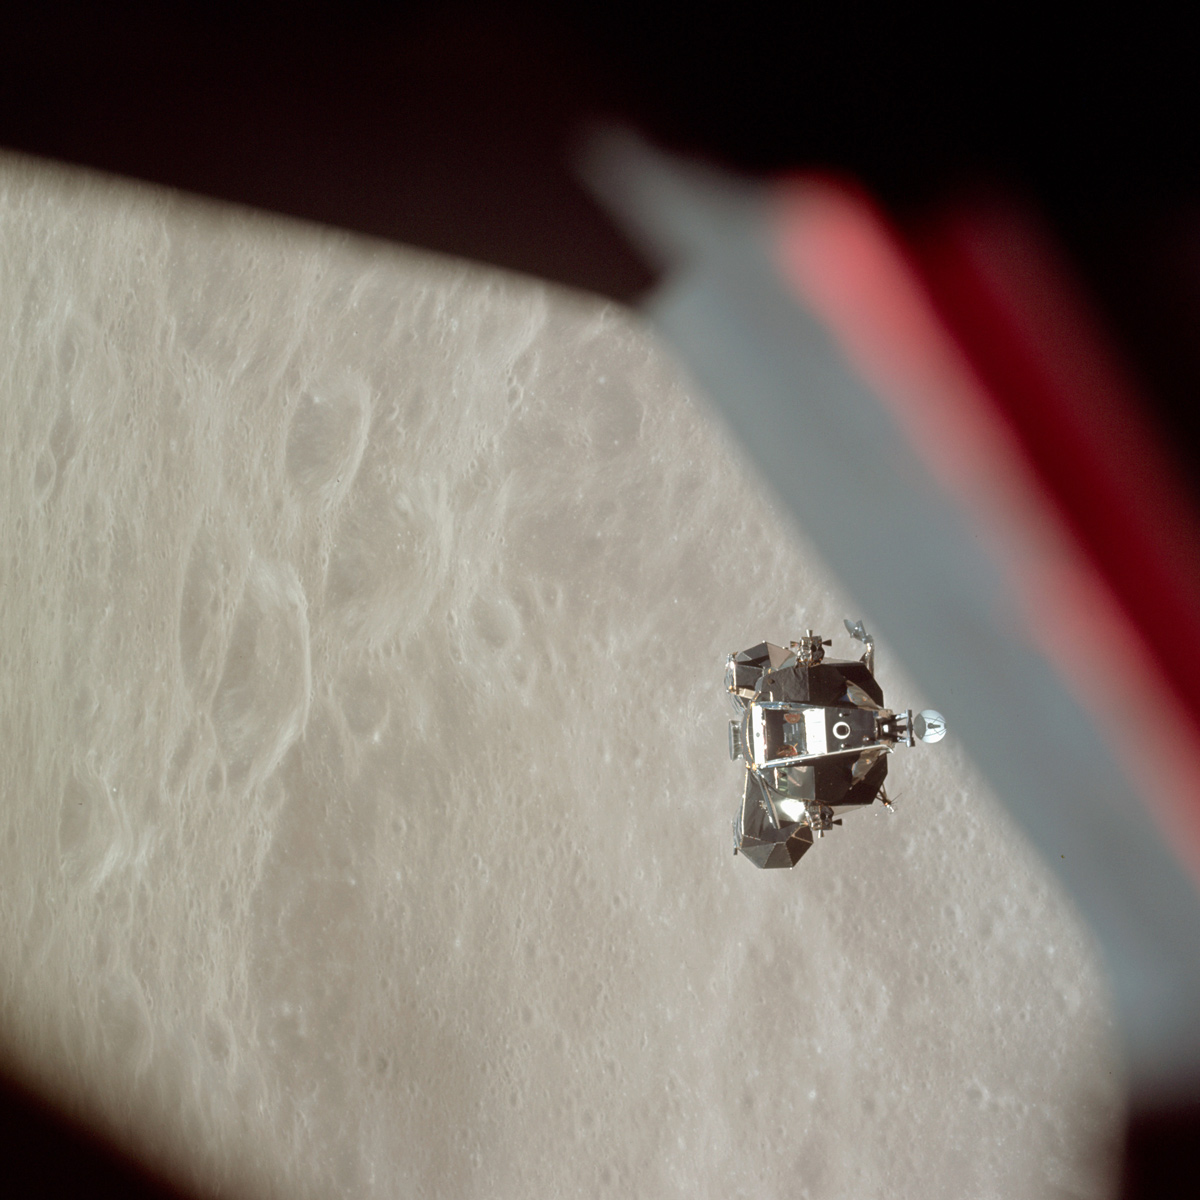 Lunar module in orbit, with the Moon's surface brightly lit in the background